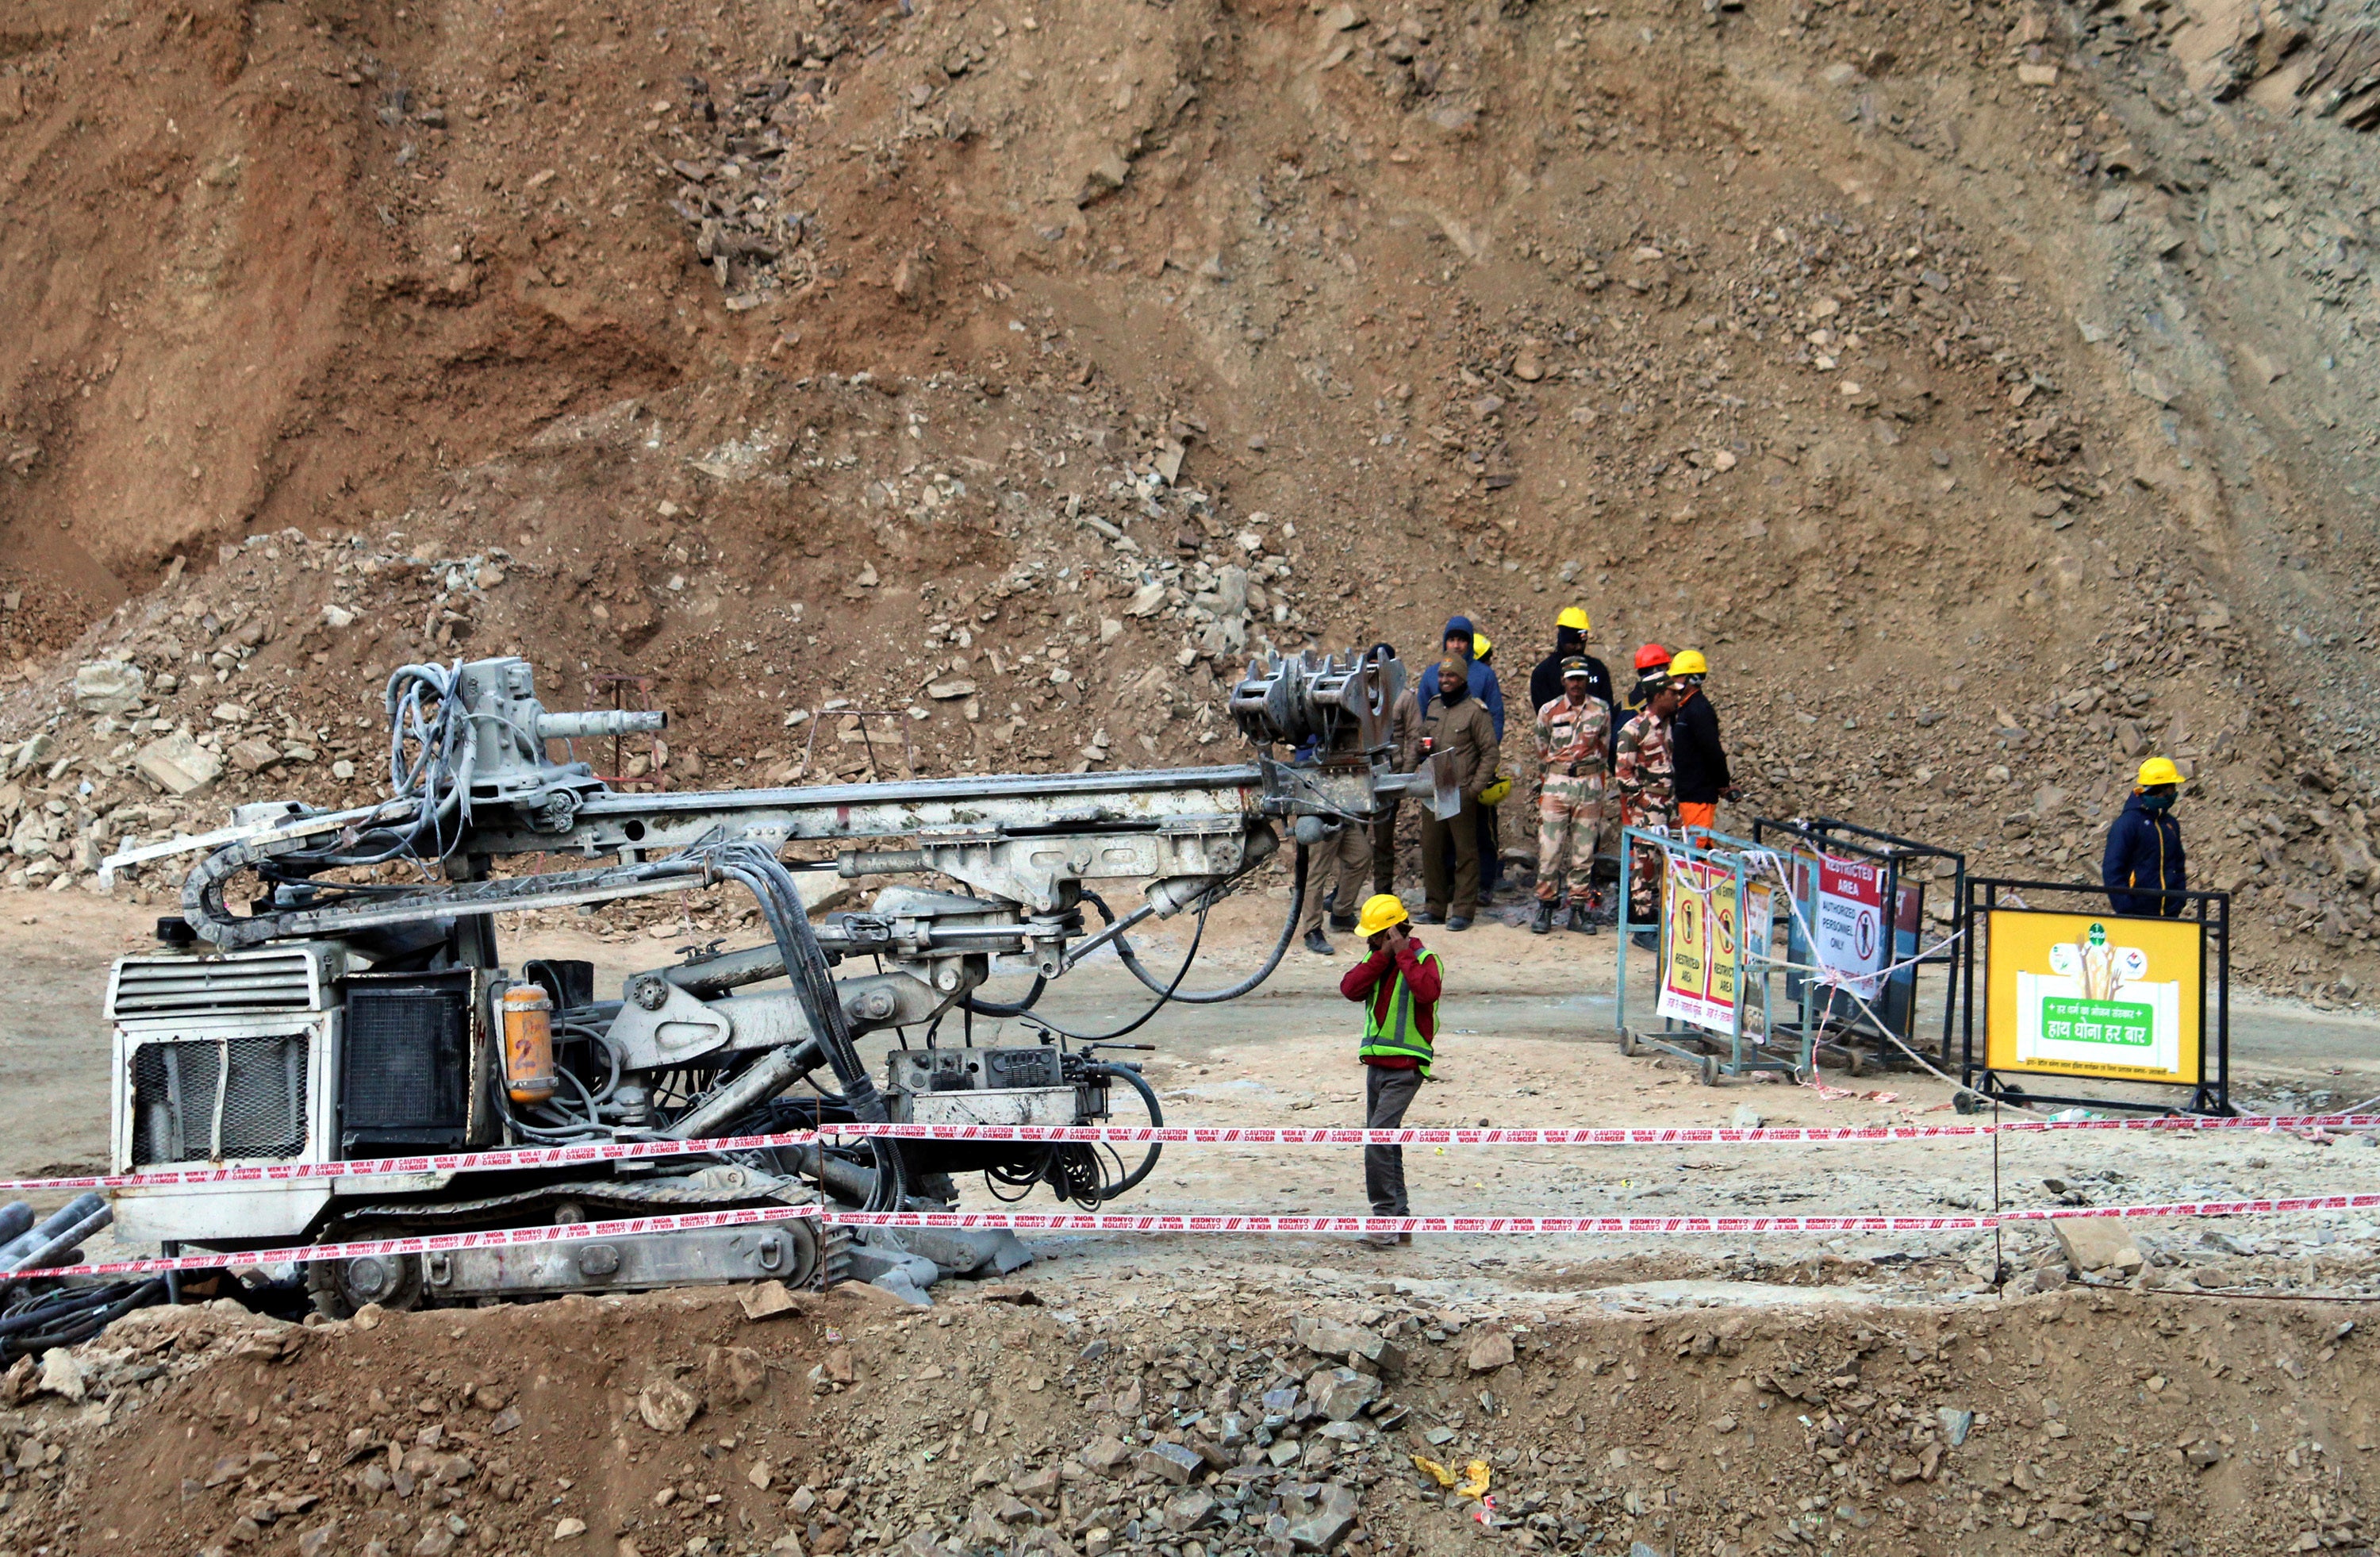 Rescuers stand near heavy machinery at the site of an under-construction road tunnel that collapsed in mountainous Uttarakhand state